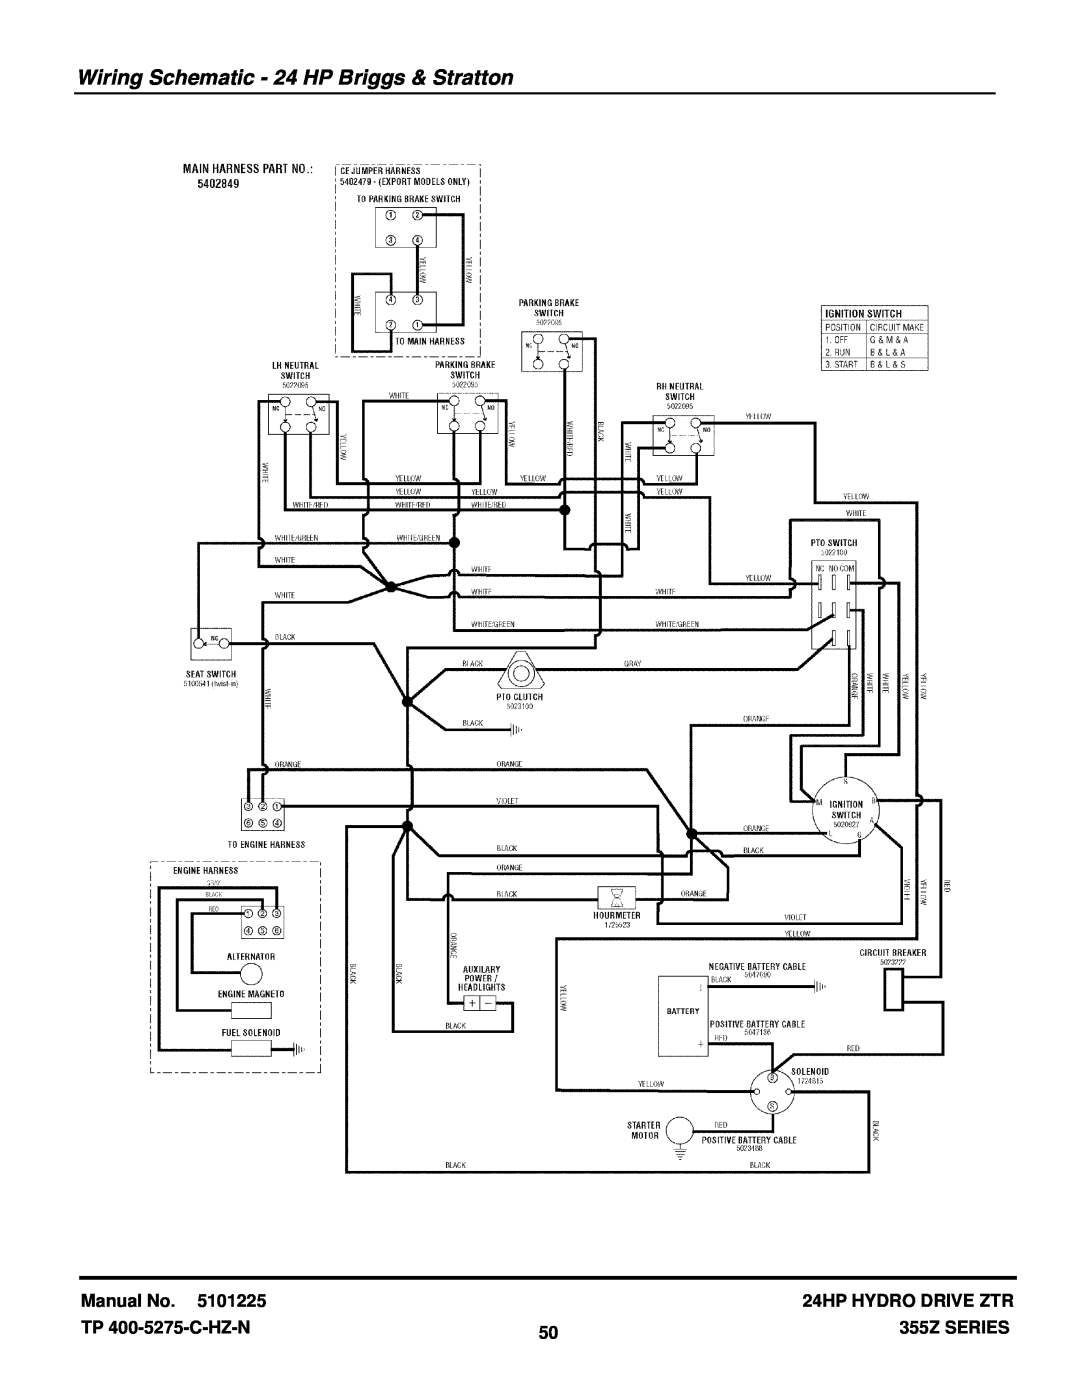 Snapper 355Z SERIES manual Wiring Schematic - 24 HP Briggs & Stratton, Manual No, 24HP HYDRO DRIVE ZTR, TP 400-5275-C-HZ-N 